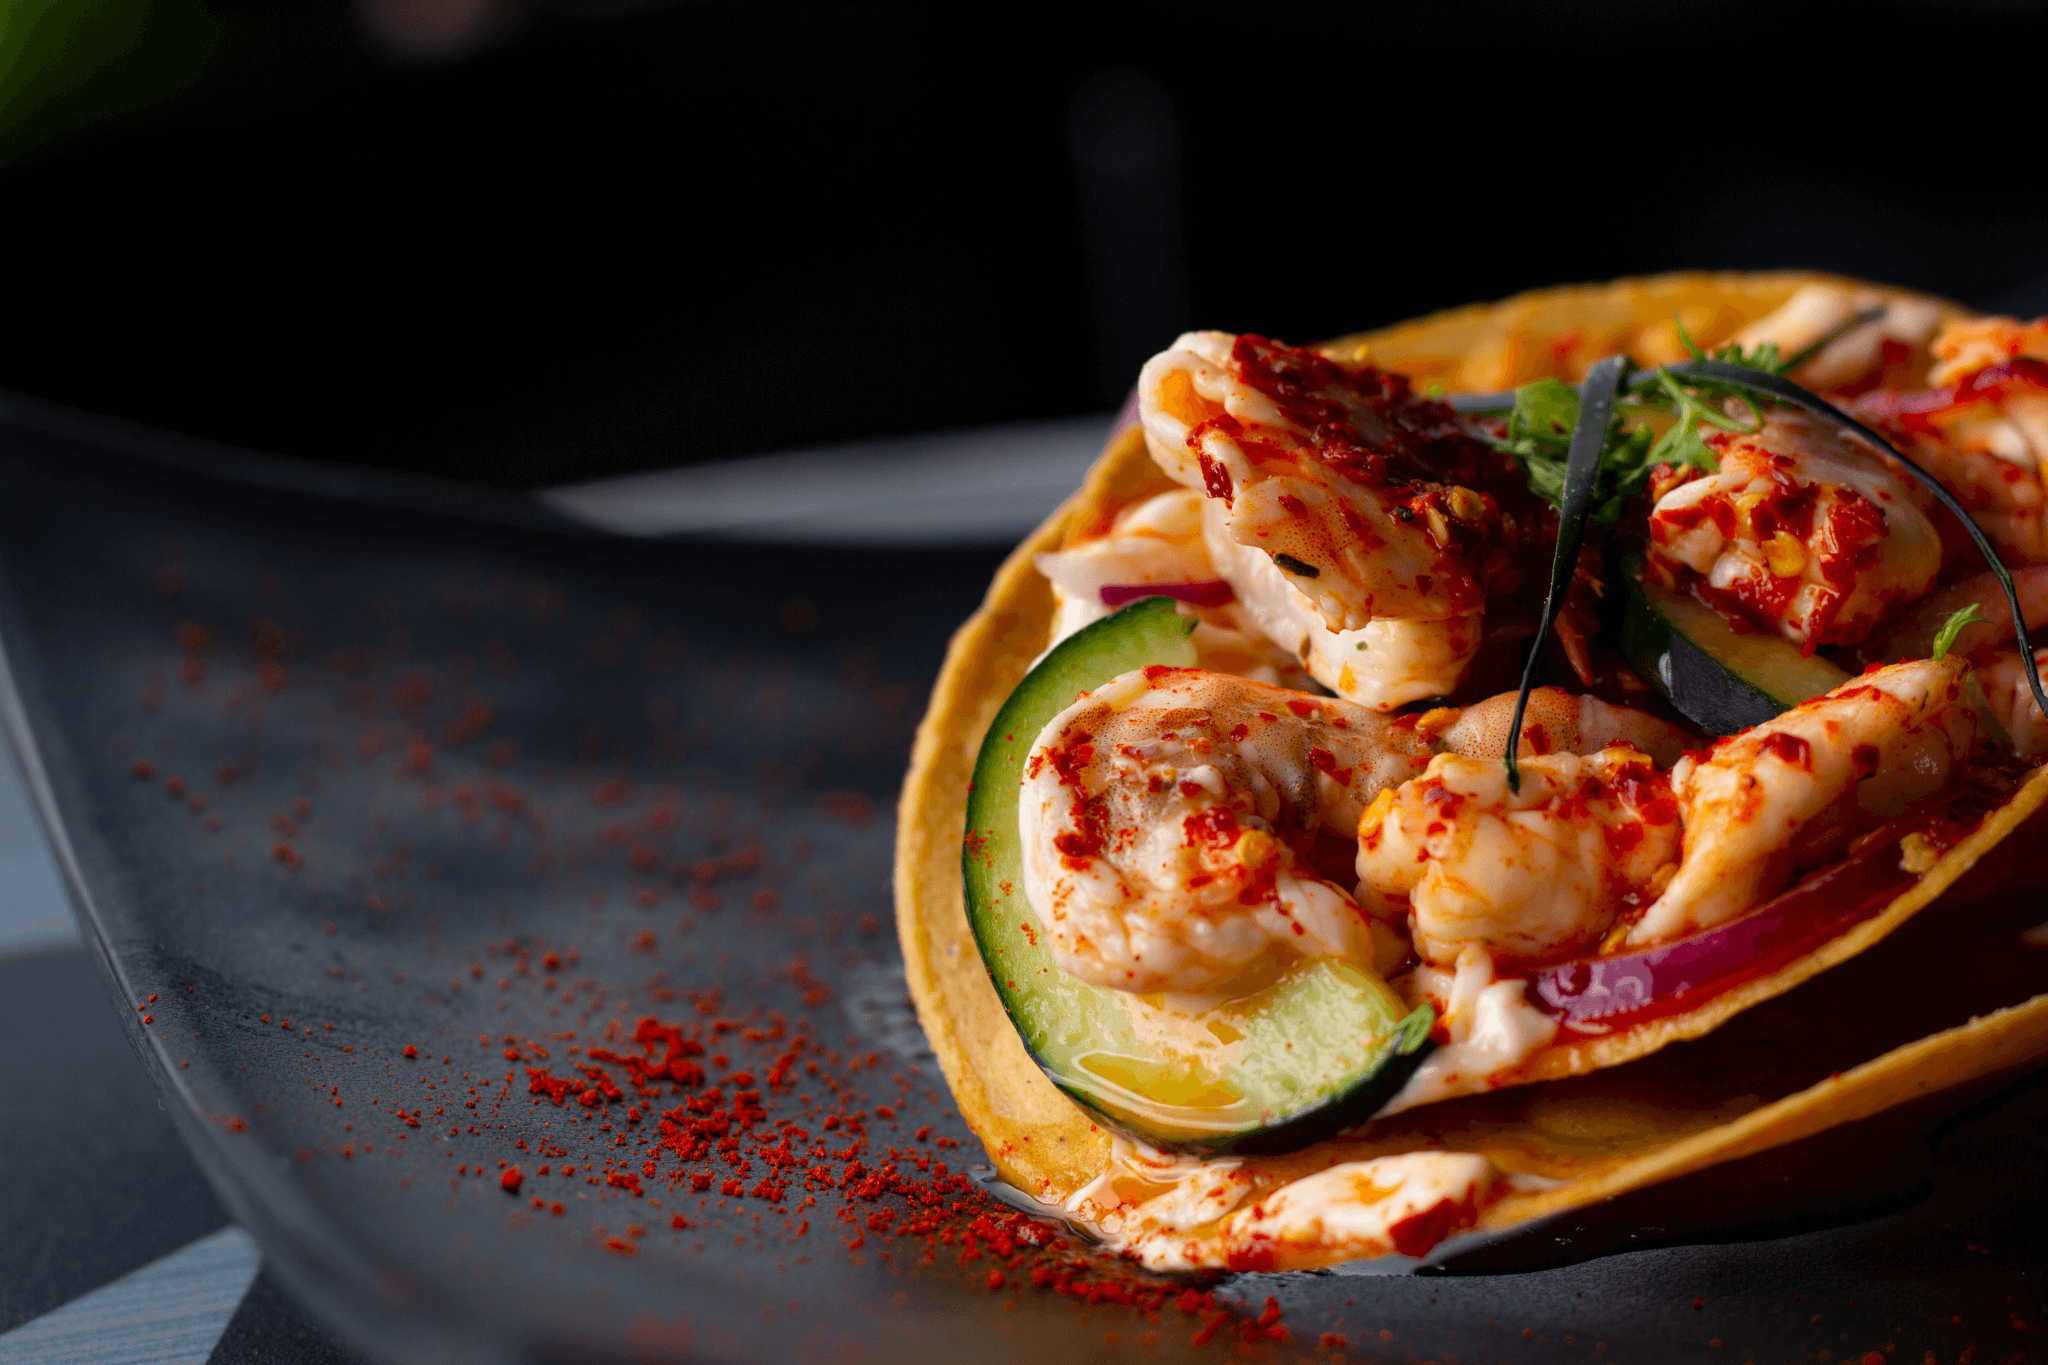 Spicy shrimps and vegetable in a taco shell